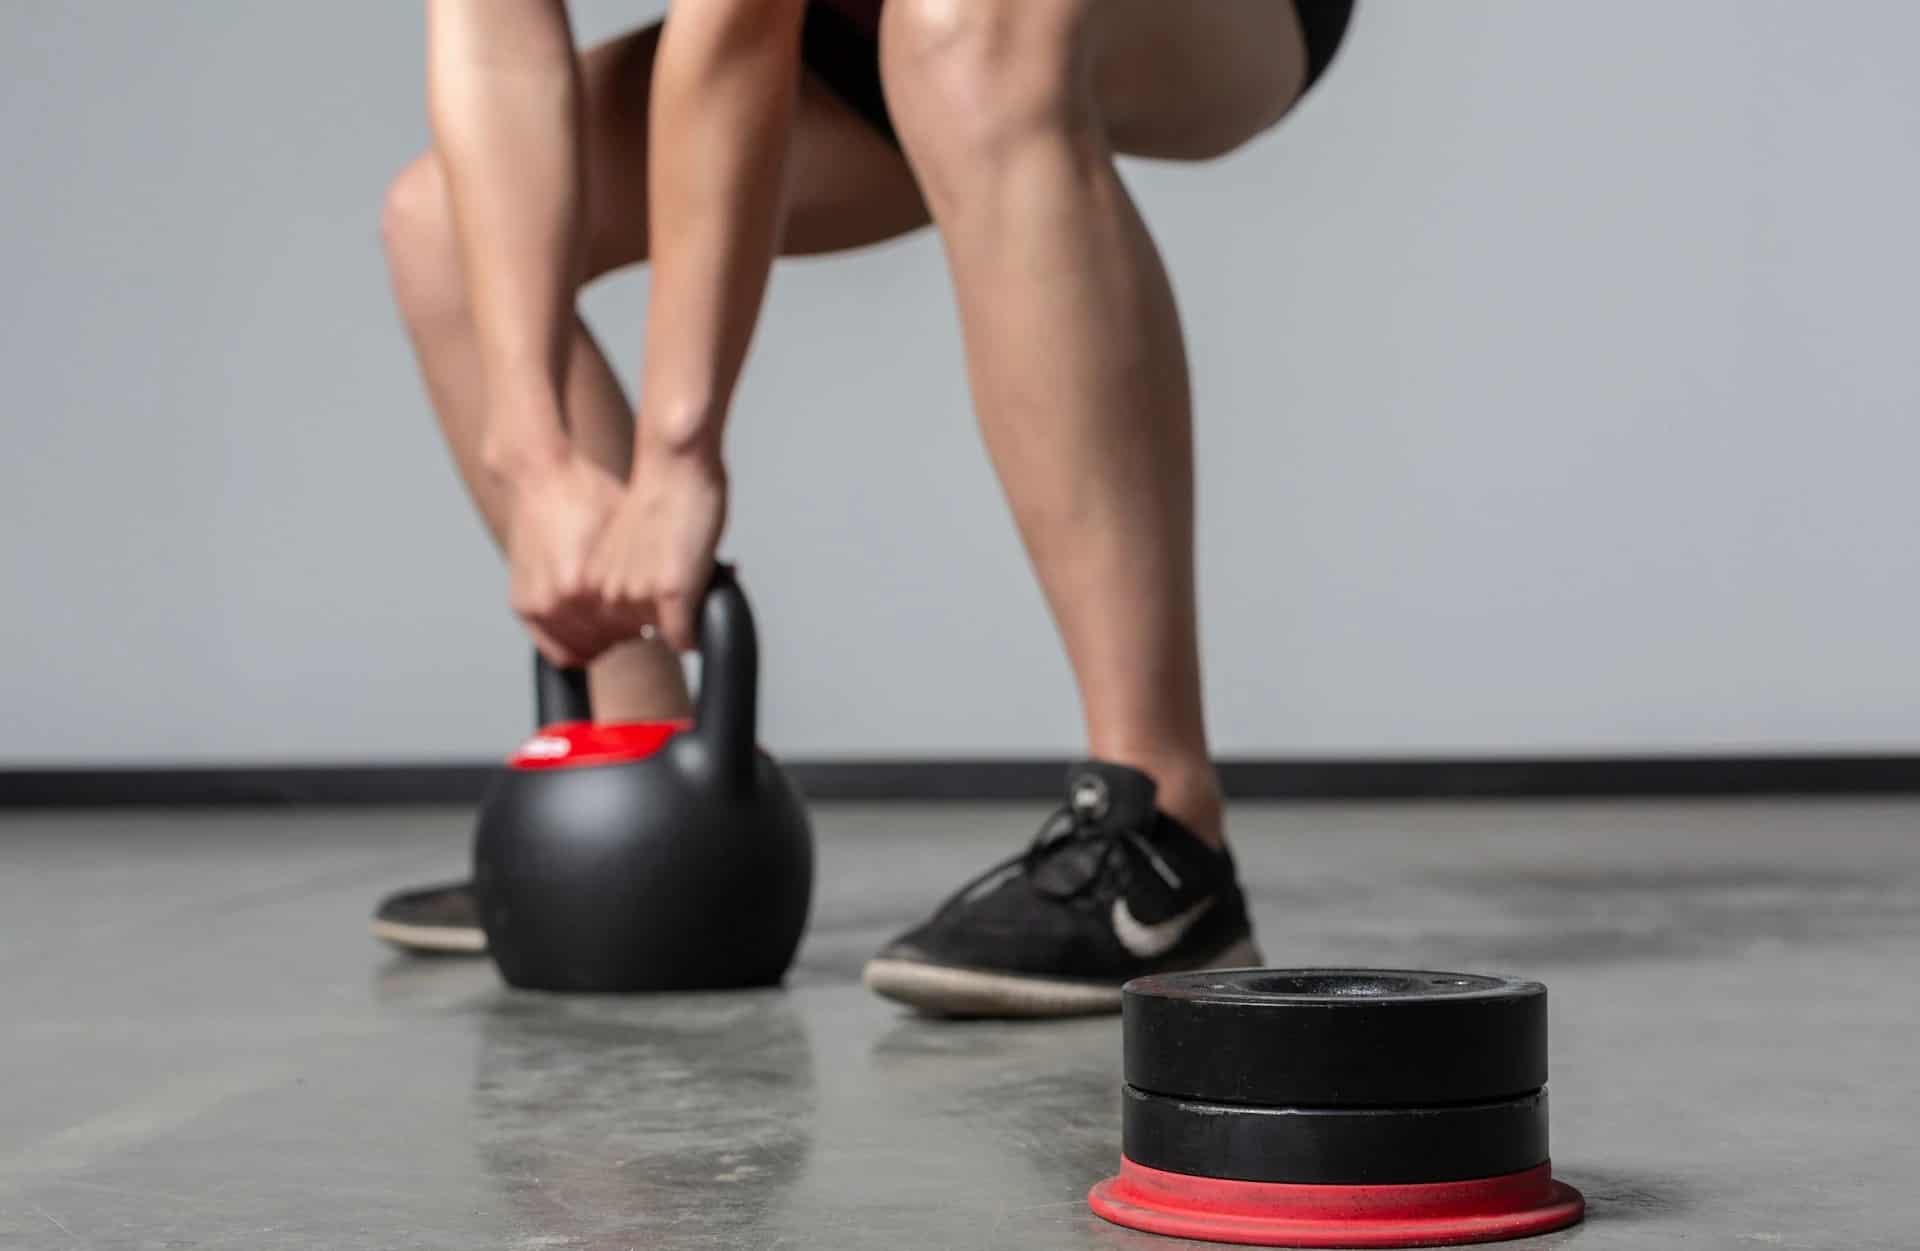 Rep Fitness Adjustable Kettlebell with a user 4